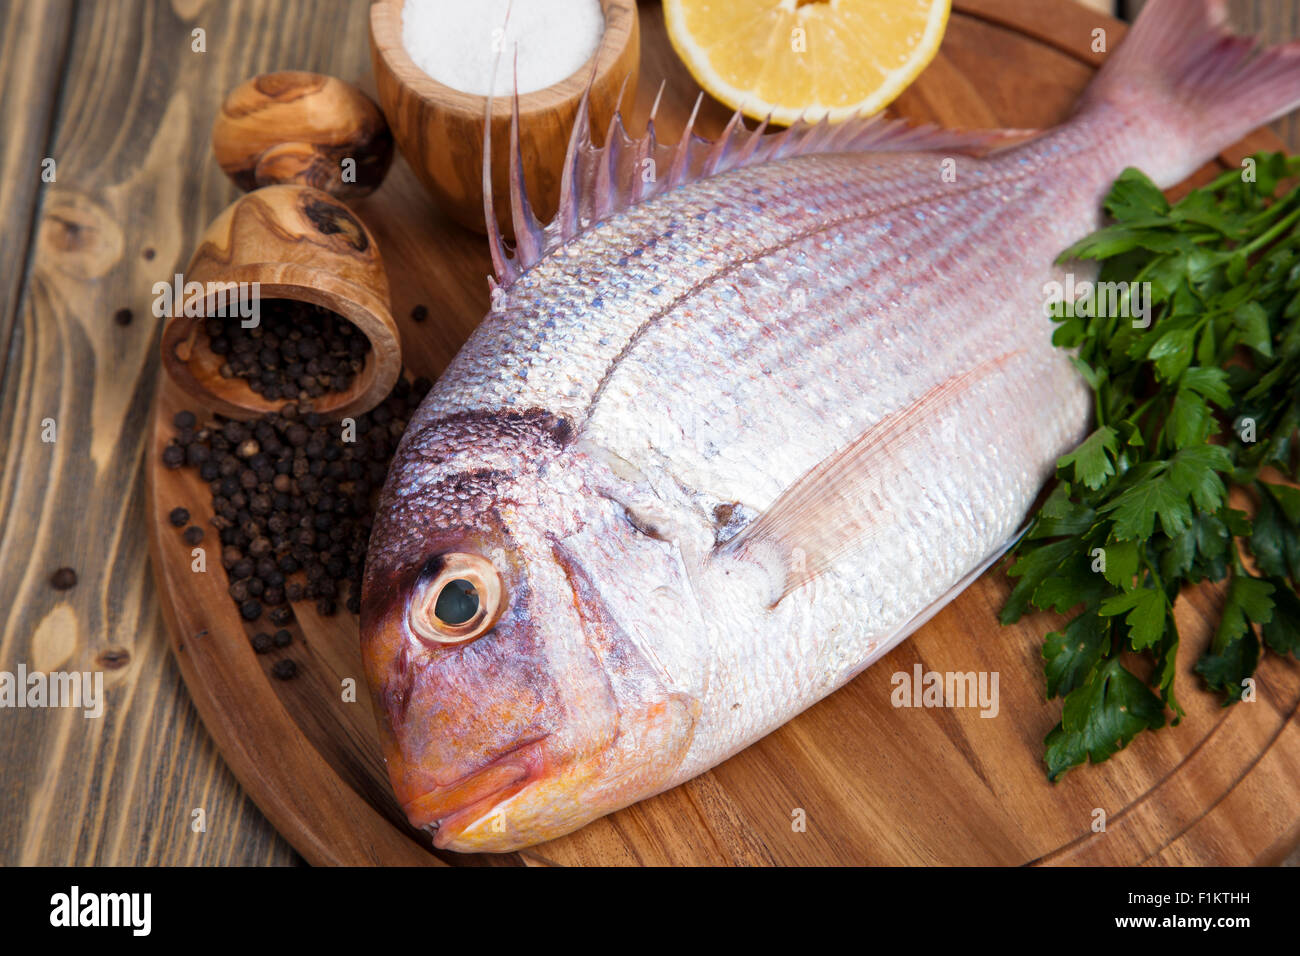 Fresh fish Pagr on a wooden board with lemon and spices Stock Photo